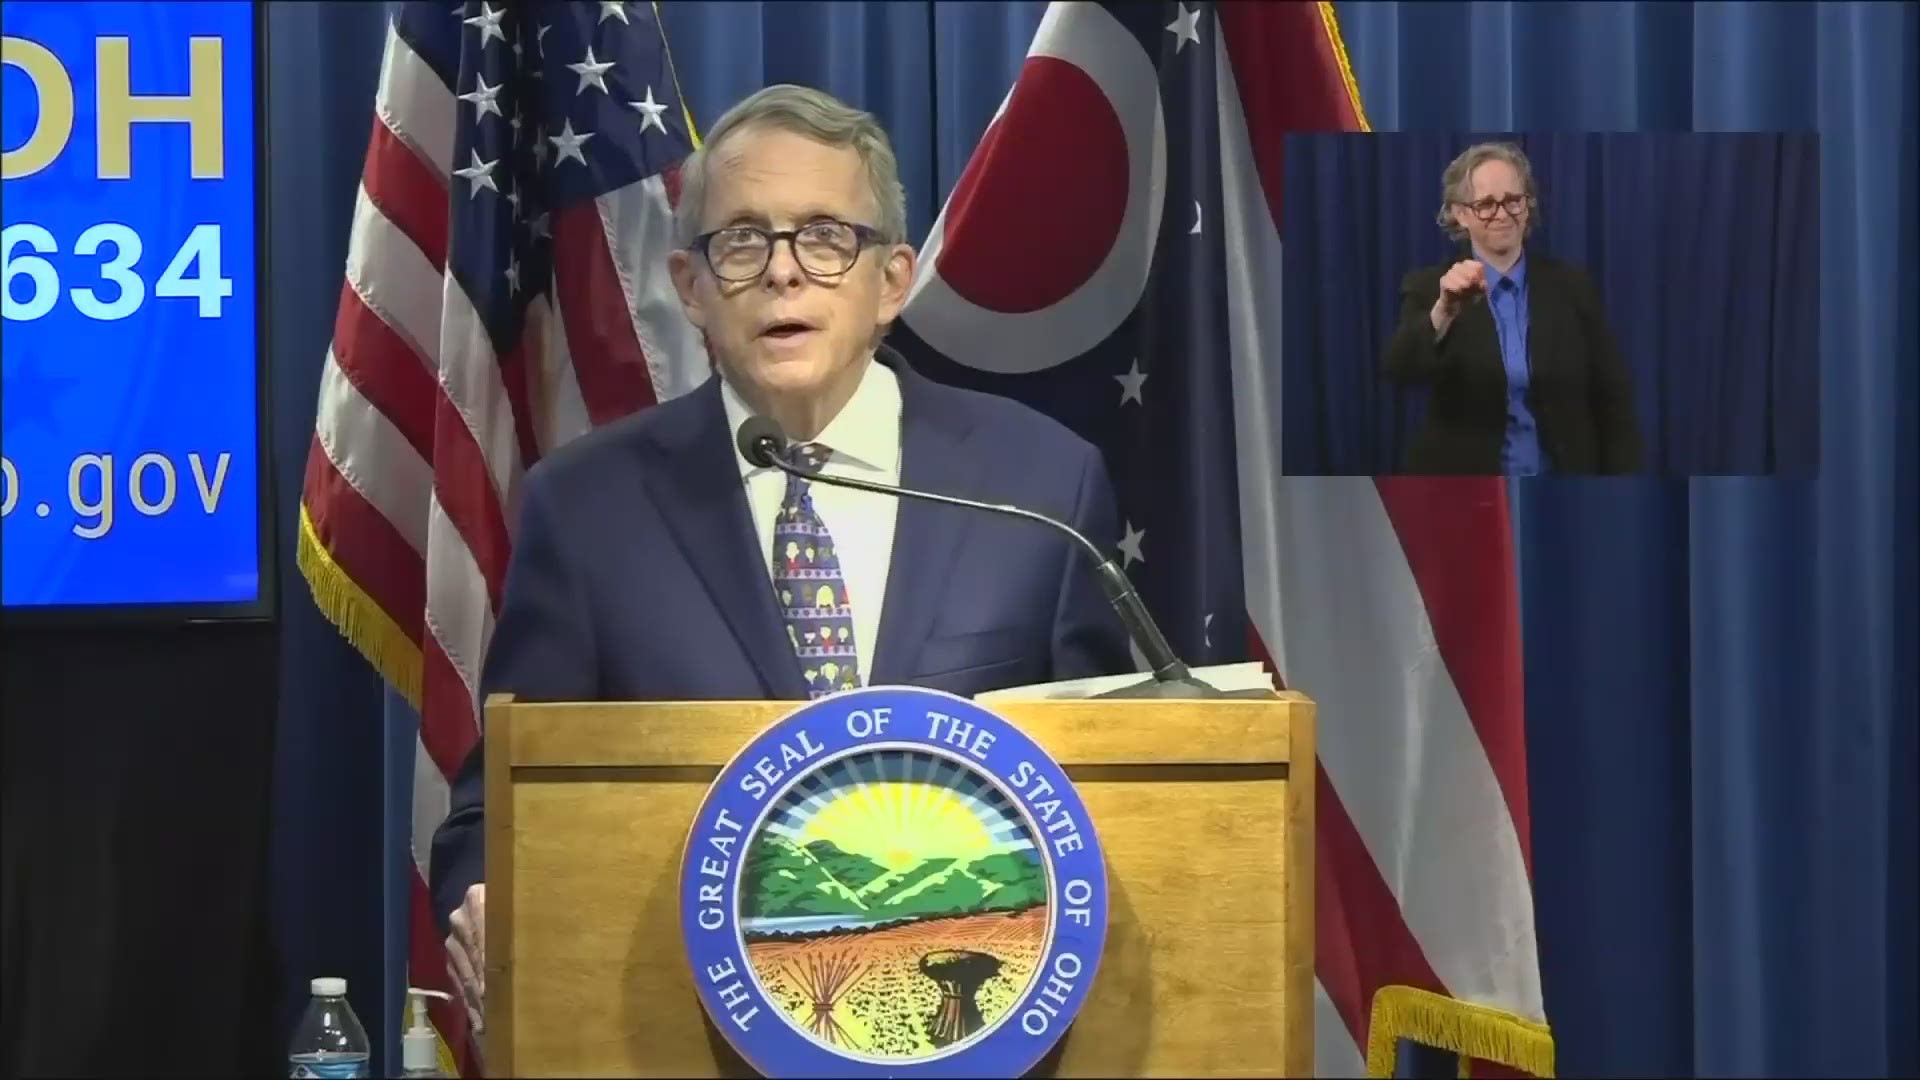 "I can't express how sorry I'm about that because I know how much all of these activities mean to young people, especially those in their senior years, said DeWine.'